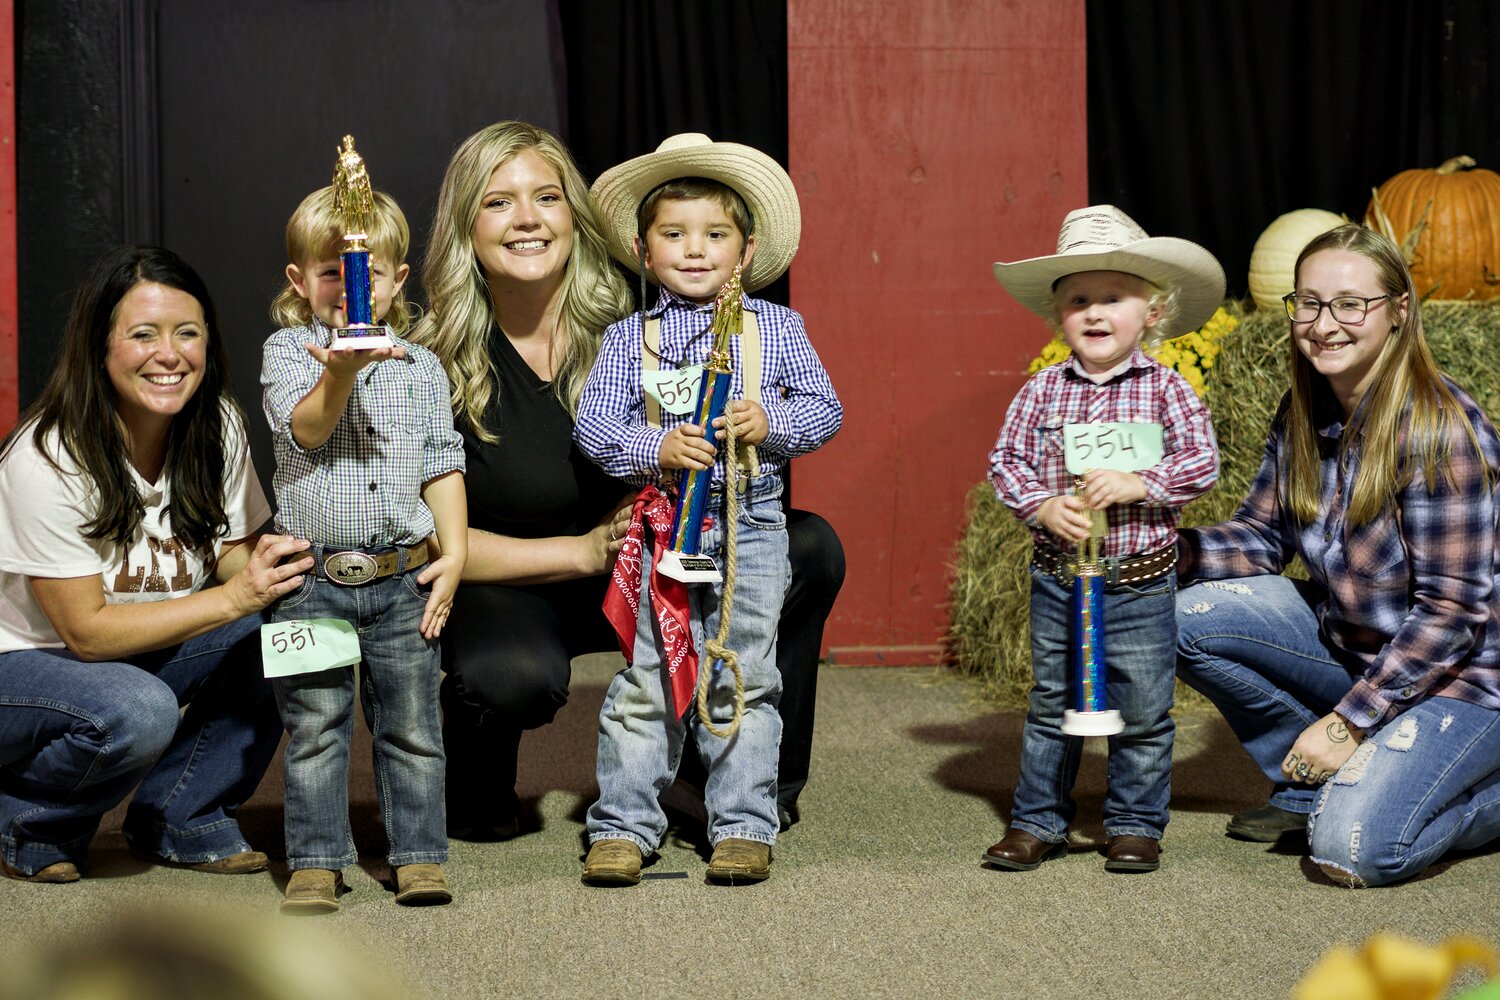 2-3 Year Old Boys - 2nd Alternate, Price Adams, son of Seth and Keshia Adams of Burnsville; Winner, Andre Hudson, son of Hanna Hudson and Billy Powell of Iuka; and 1st Alternate, Xander Newcomb, son of Katelyn Newcomb of Burnsville.